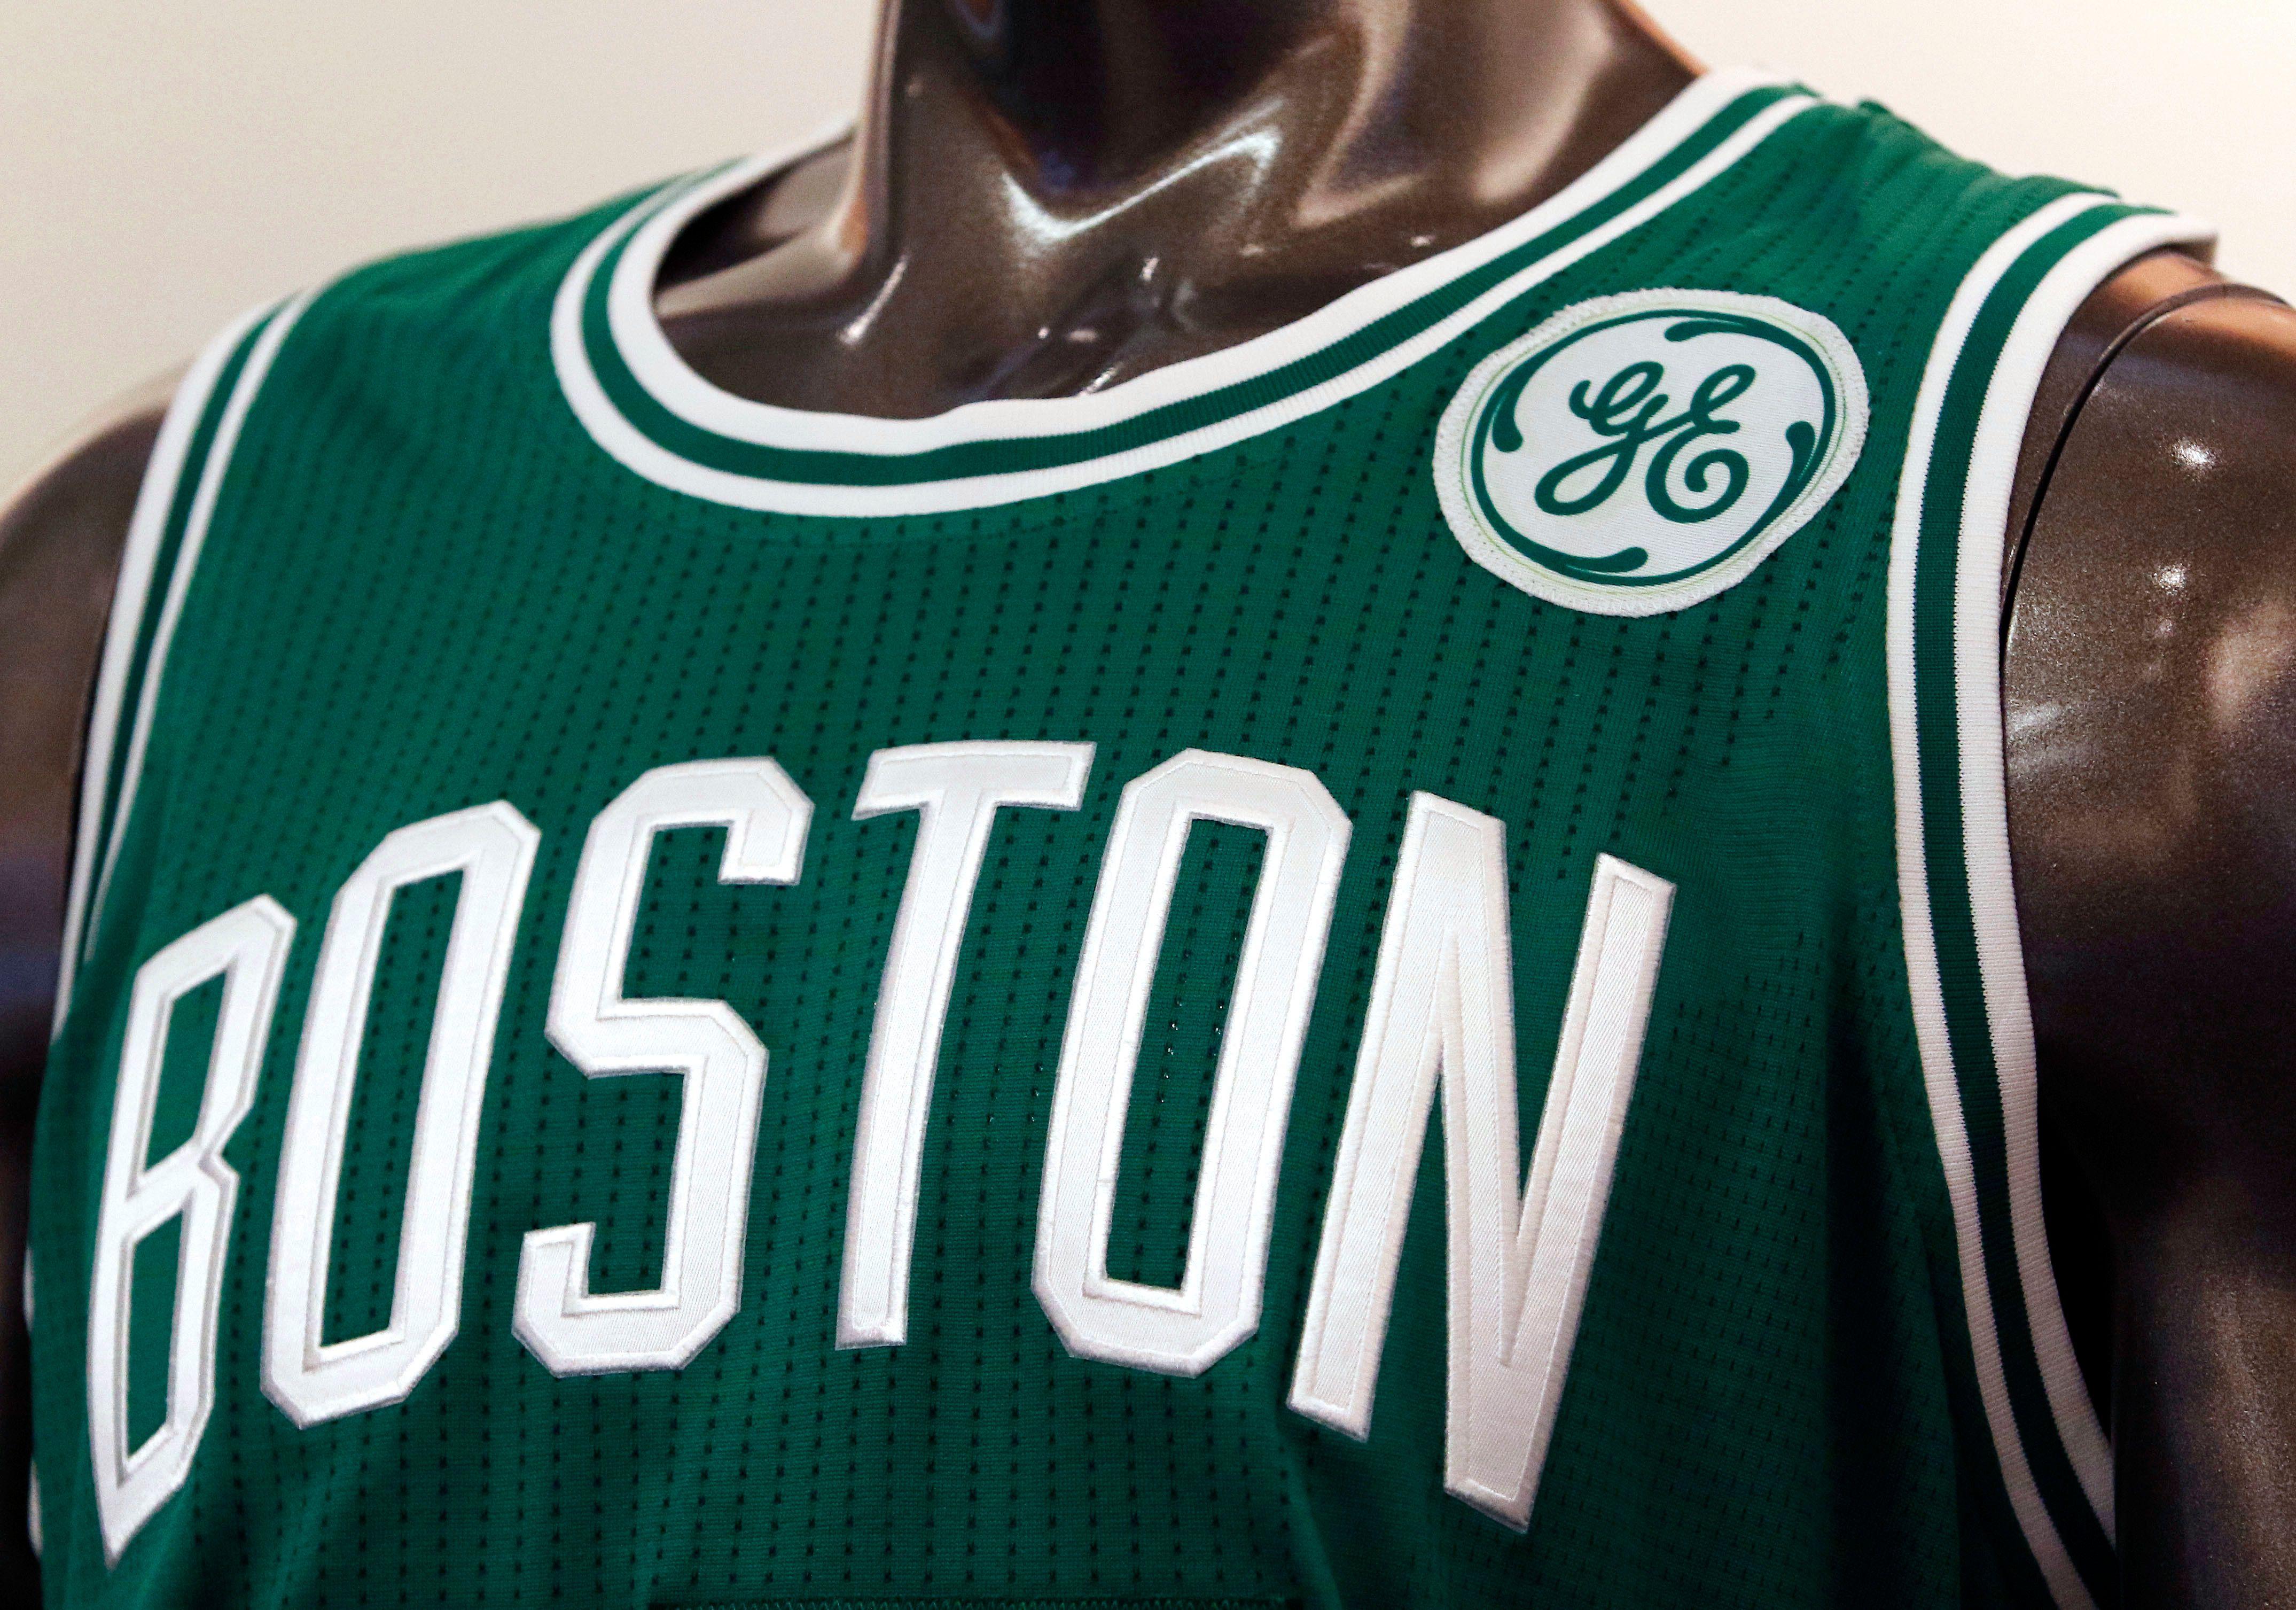 New General Electric Logo - General Electric inks deal to put logo on Boston Celtics jerseys